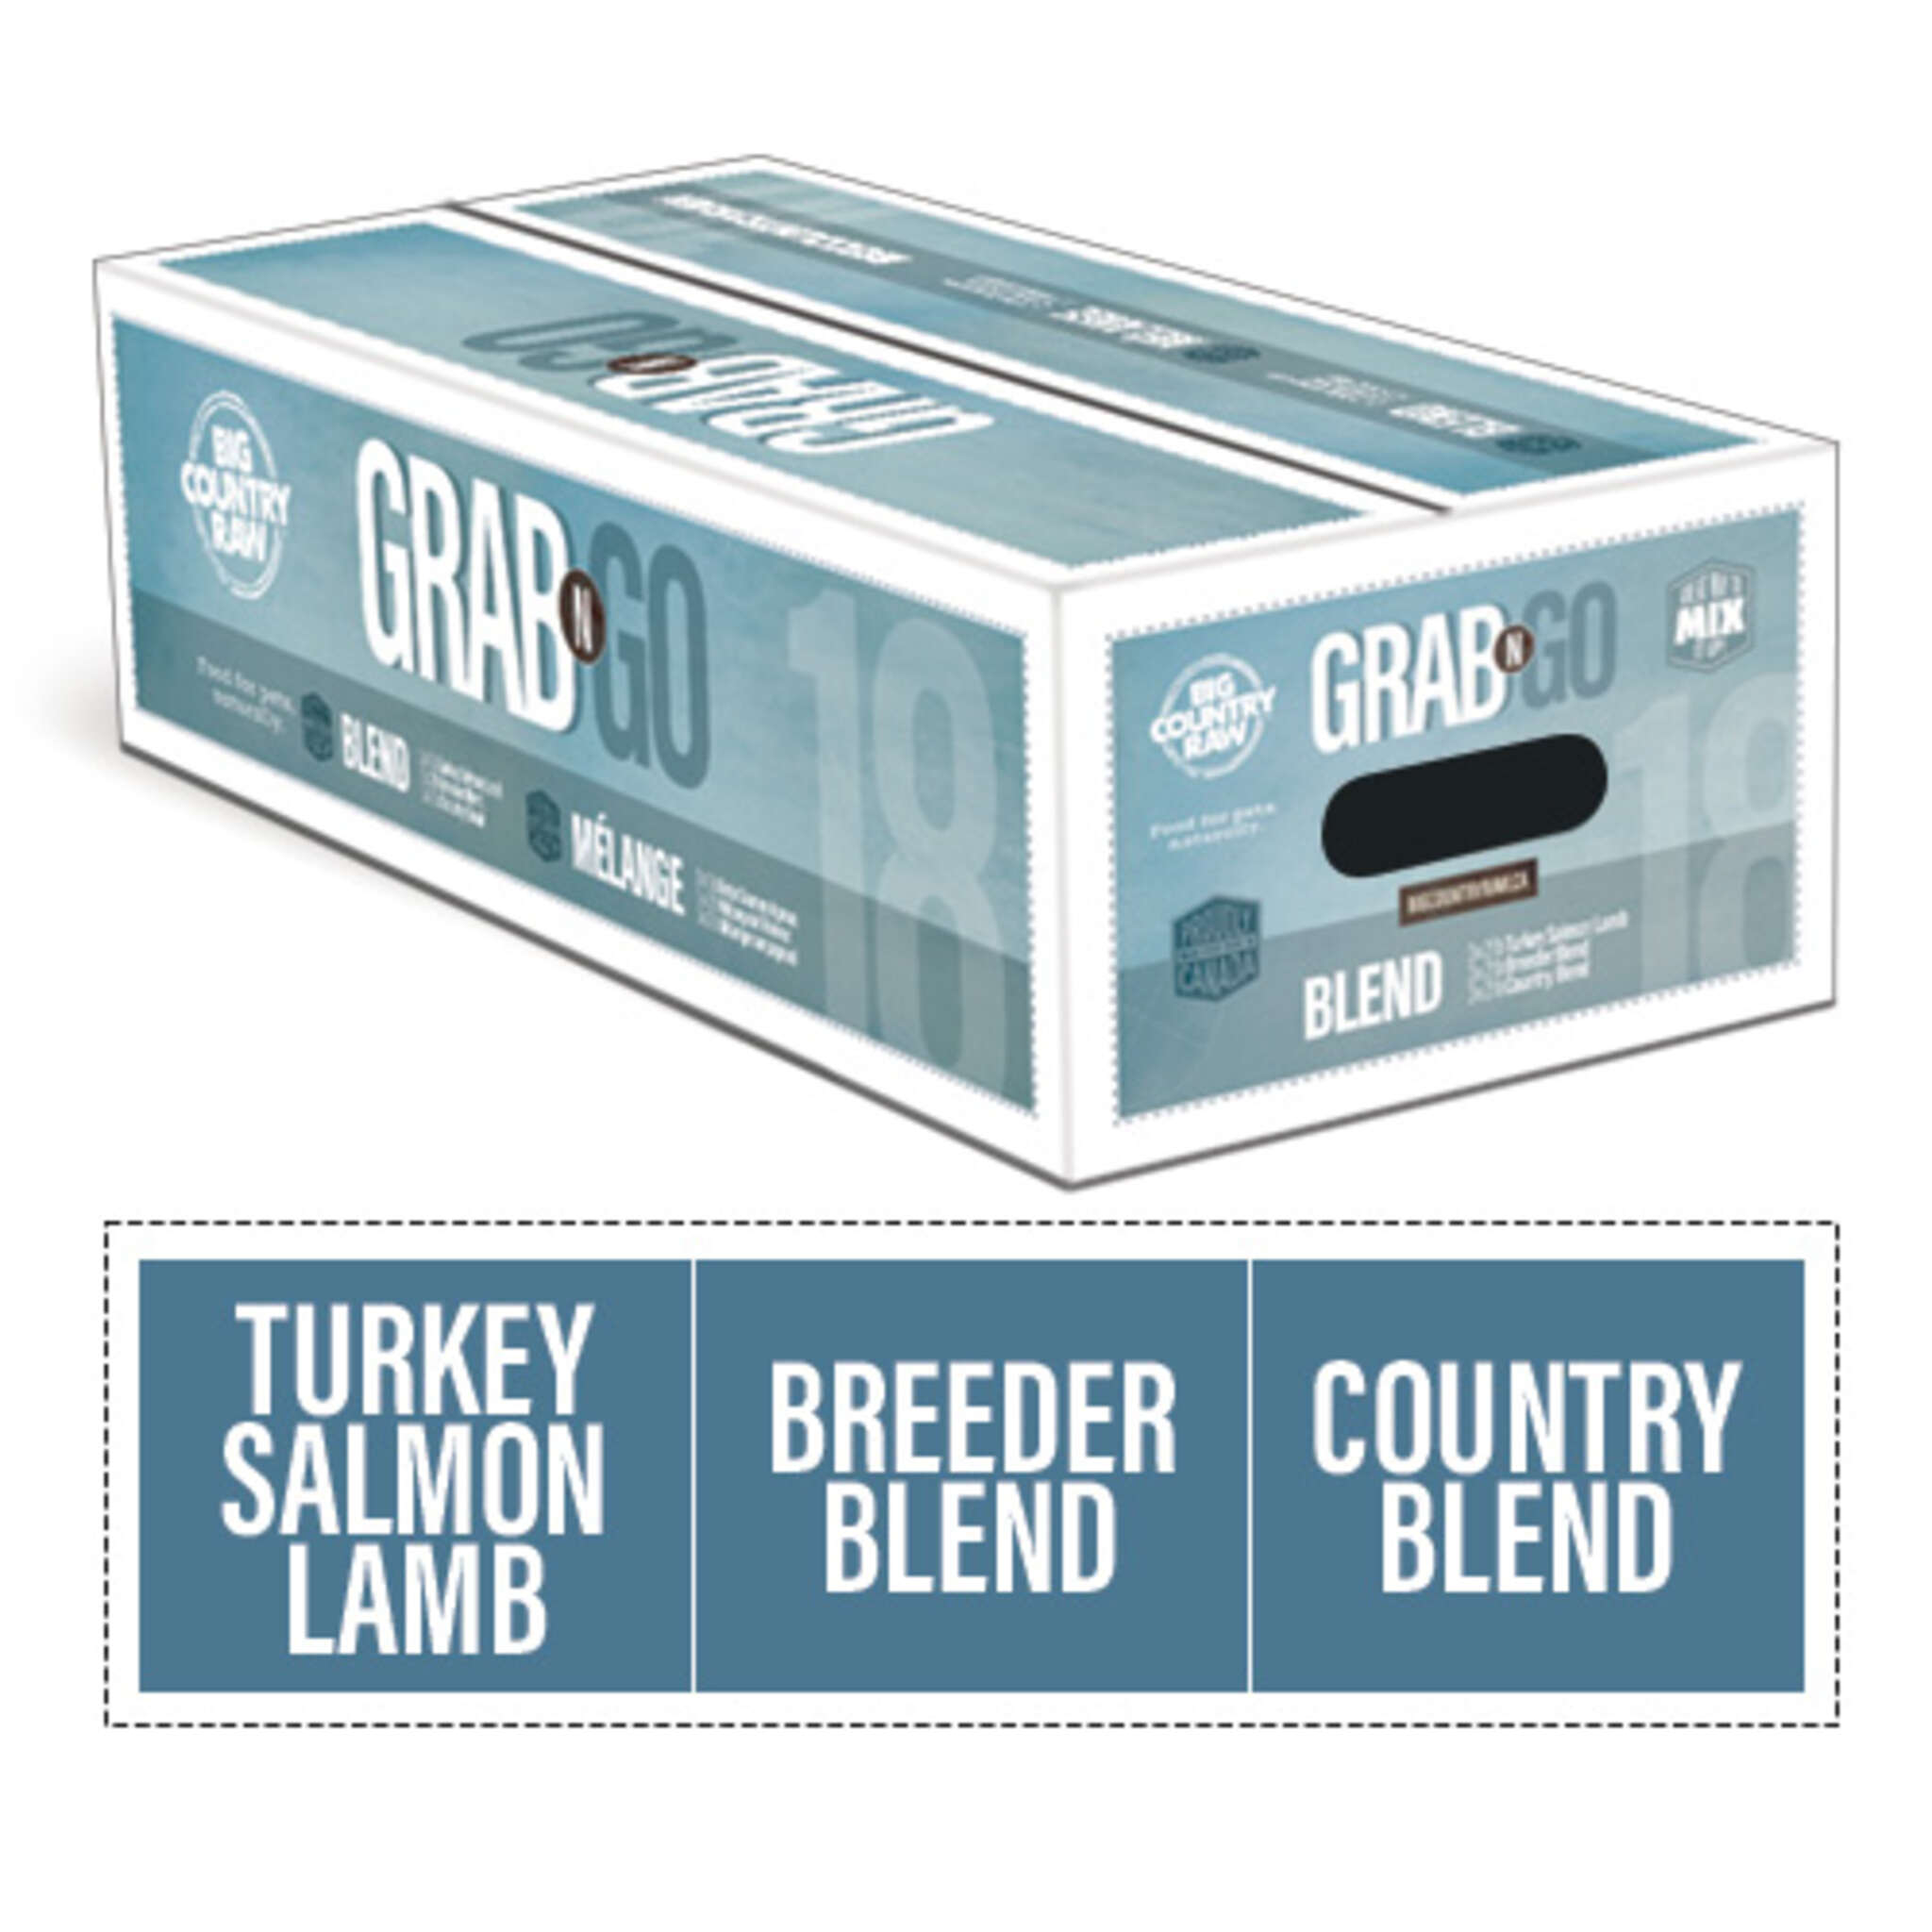 A box of Big Country Raw Grab & Go Blend 18, bulk dog food, contains 3 blends recipes: Turkey Salmon Lamb, Breeder Blend, Country Blend, 18 lb (contains nine 2 lb containers), requires supplementation and freezing.